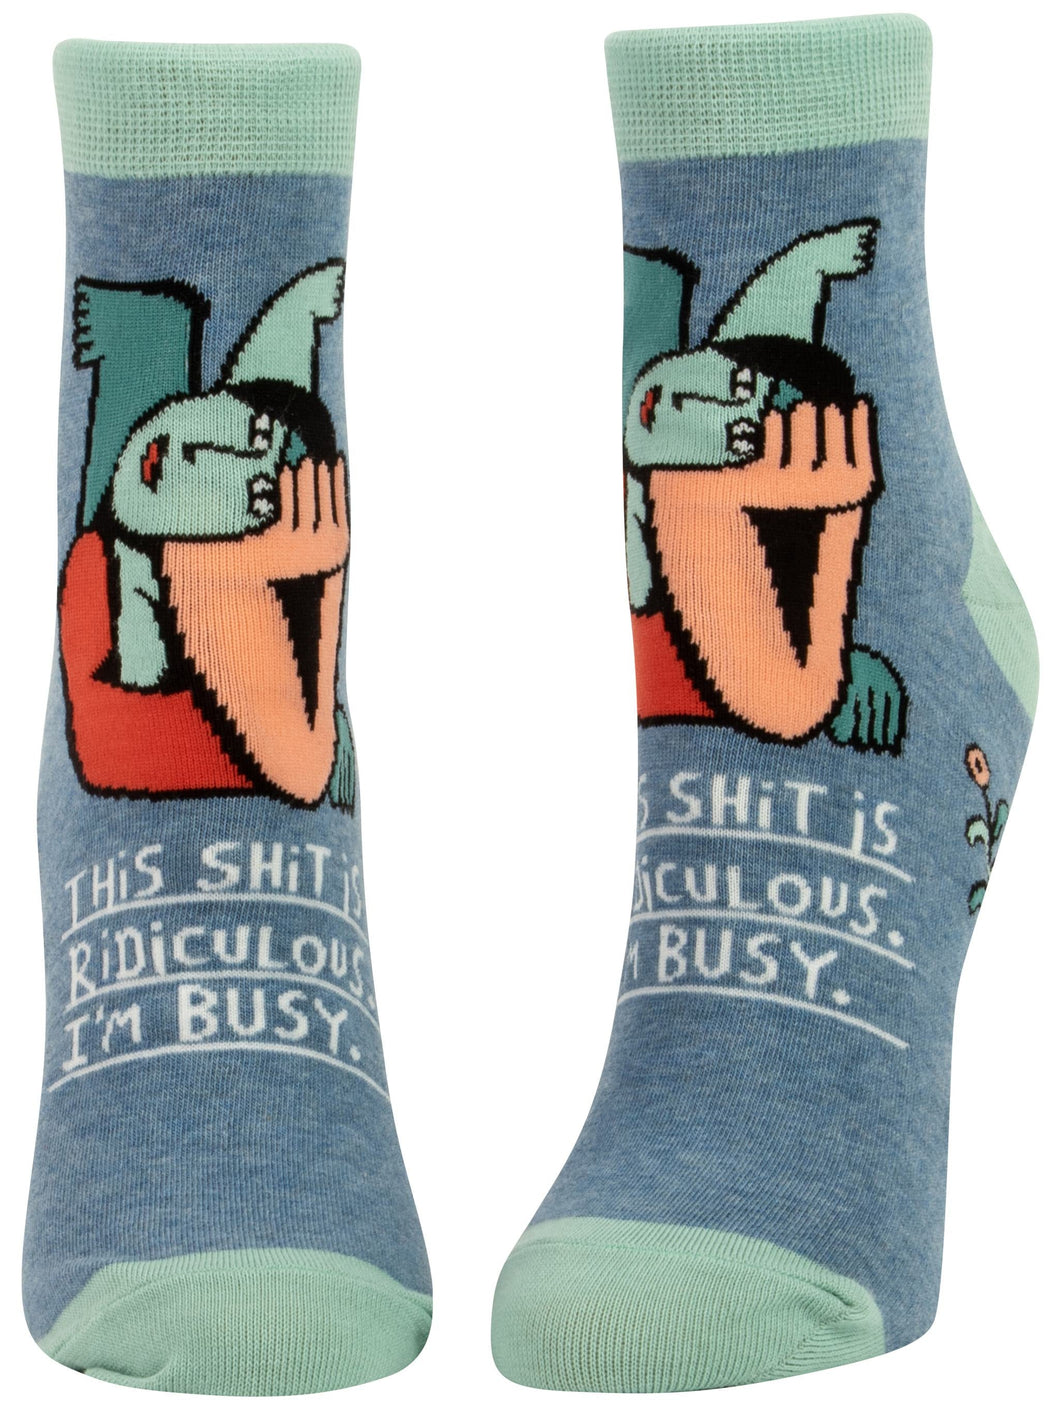 Shit Is Ridiculous Ankle Socks